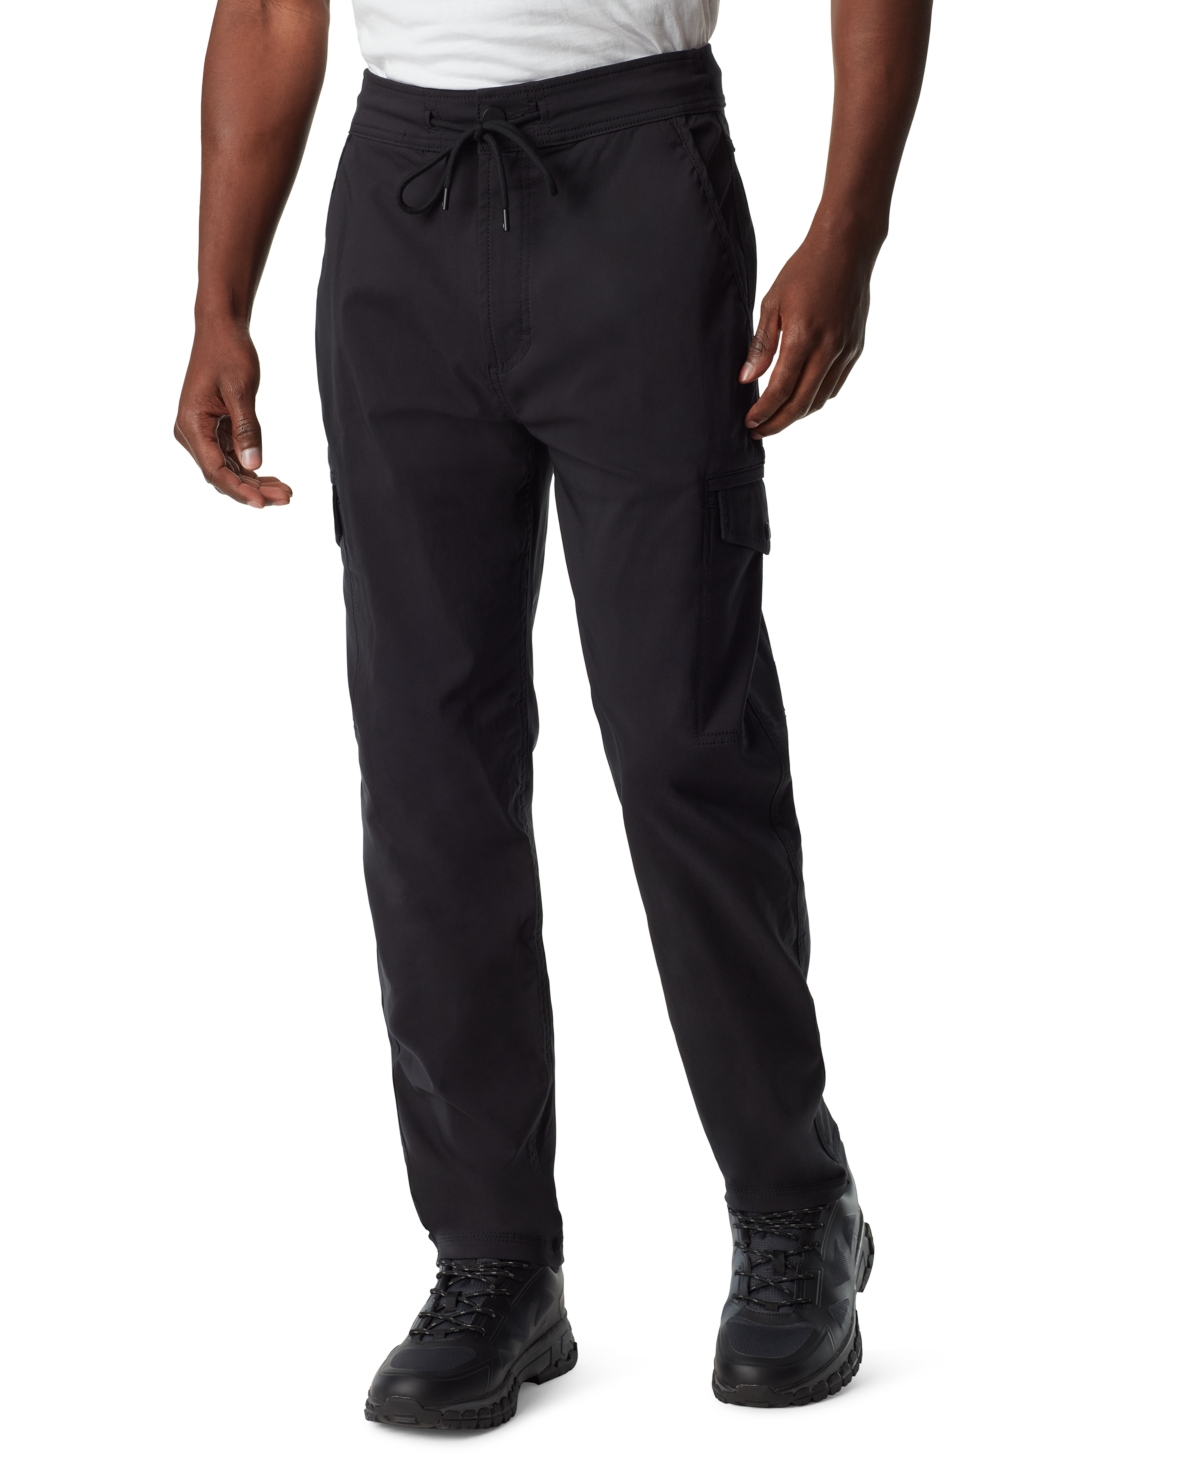 Men's Slim-Straight Fit Cargo Joggers - Forged Iron